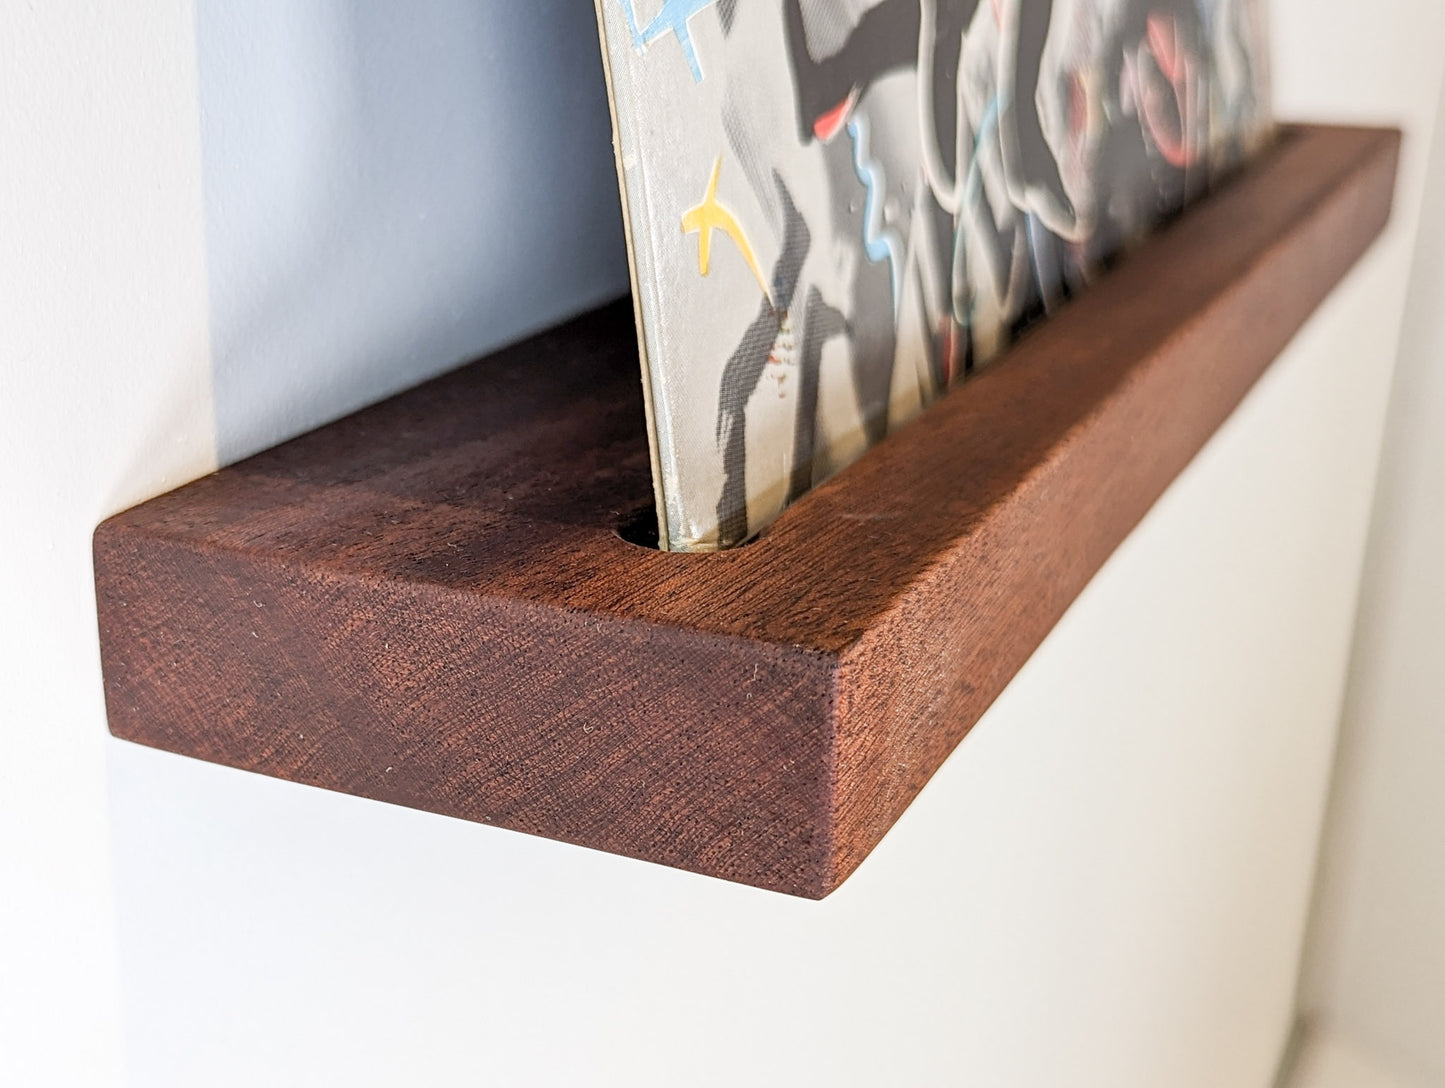 Side angled picture of a mahogany shelf with an album sleeve as decor.